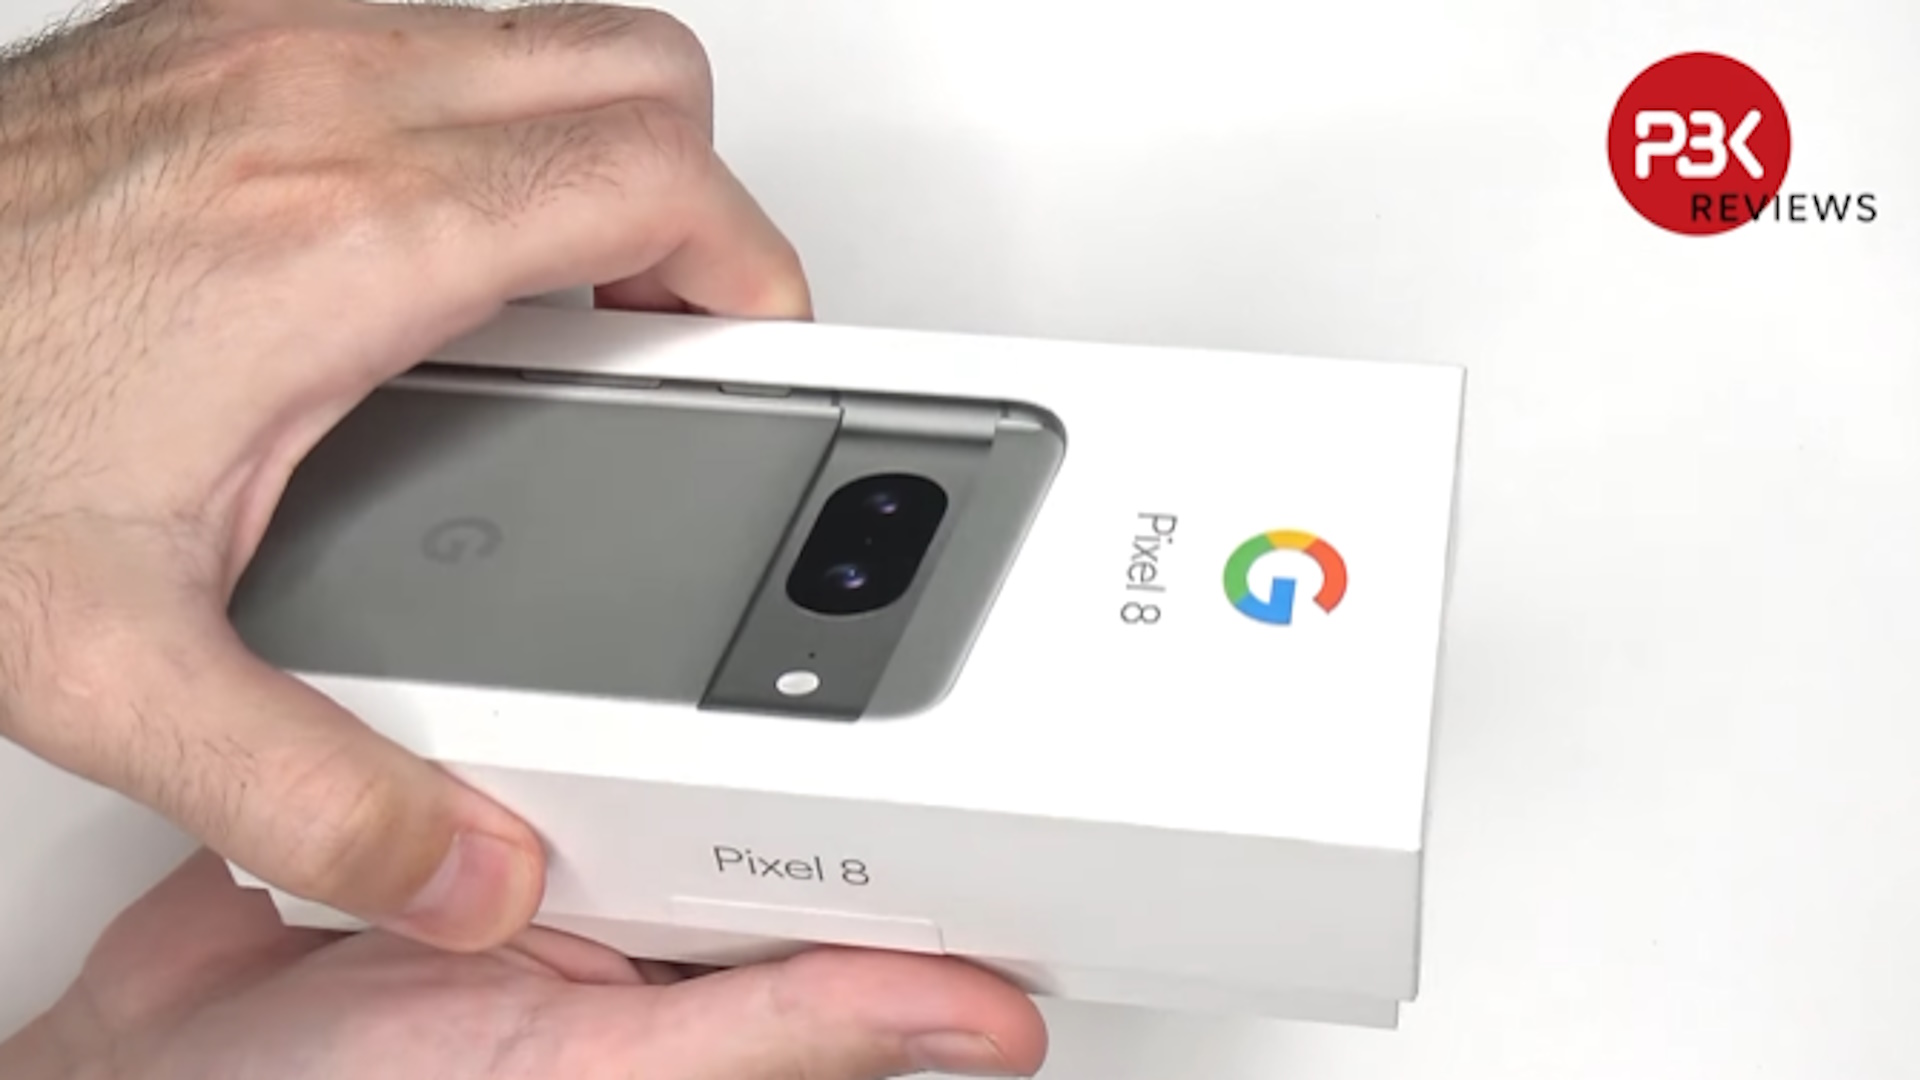 Google Pixel 8 unboxed and shown two days before the official presentation